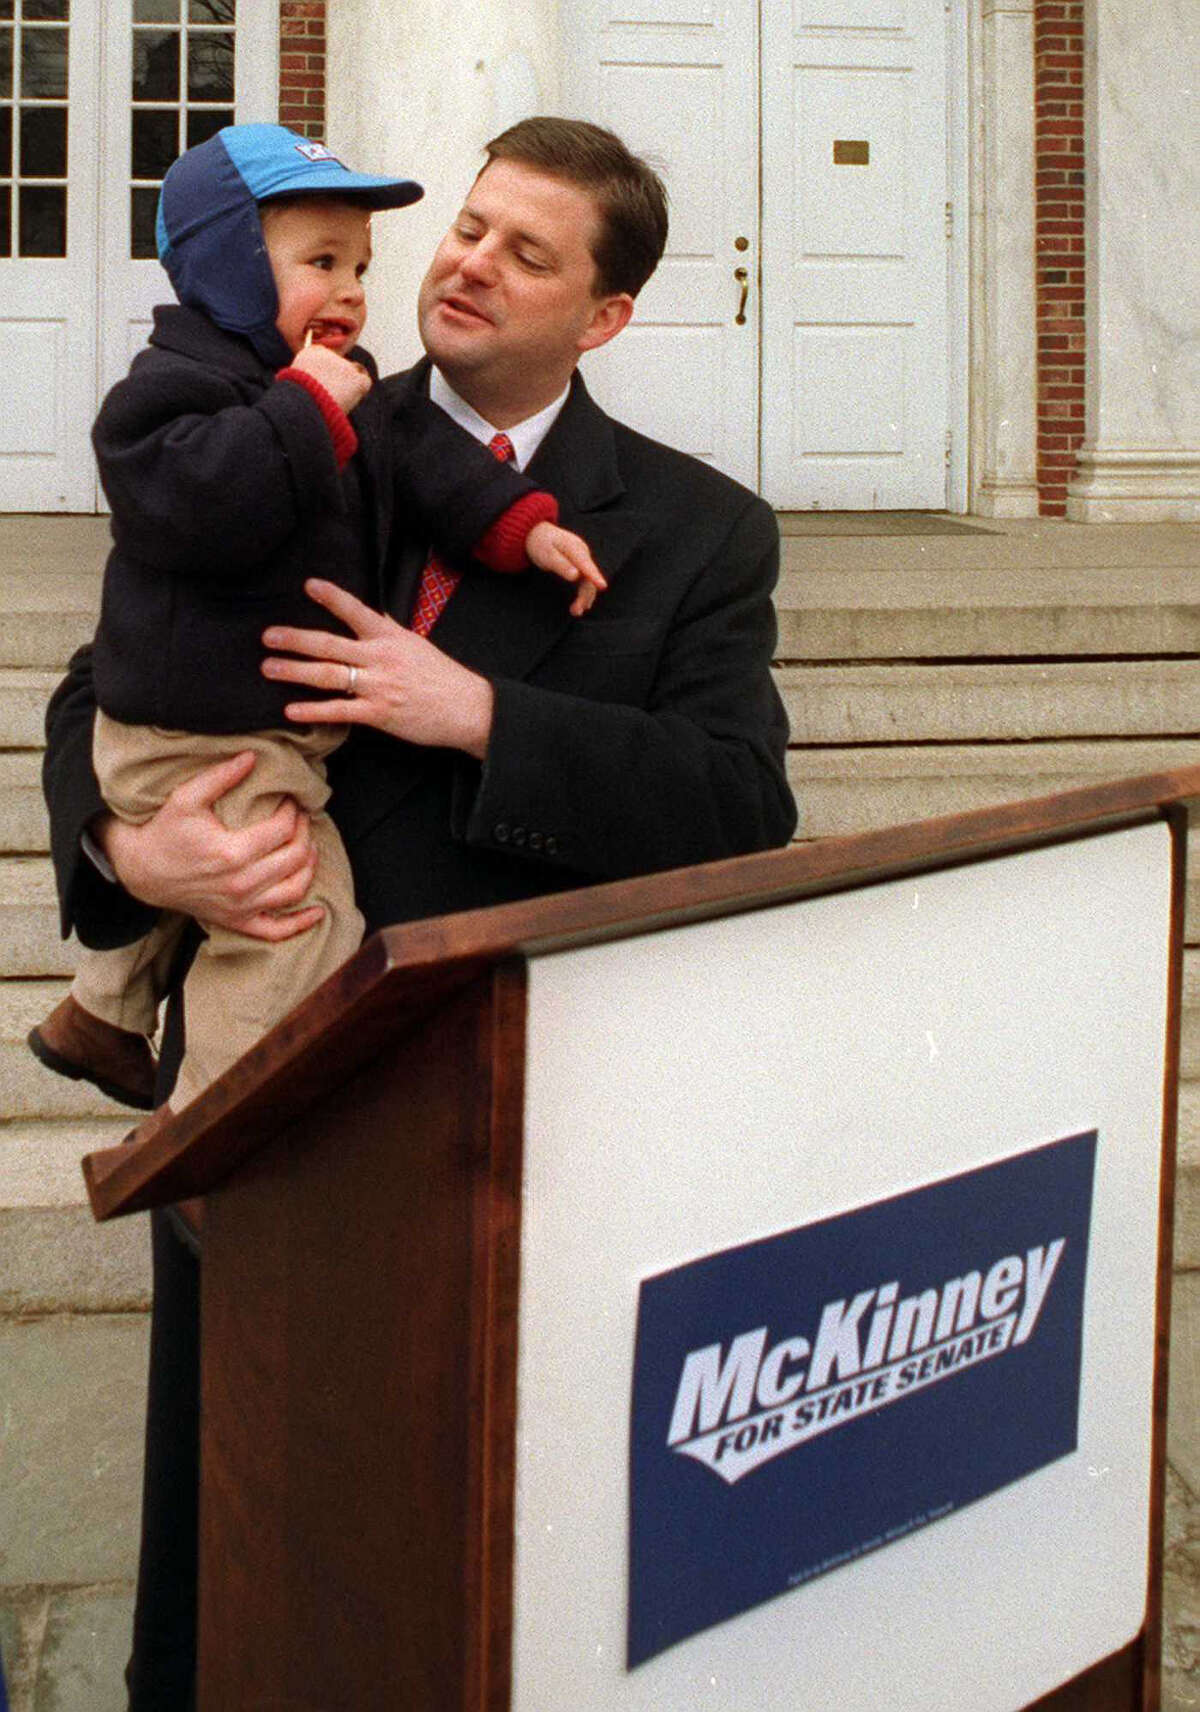 John McKinney holds his one year old son, Matthew, while announcing his candidacy for State Senate in Newtown, Conn. in 1998.